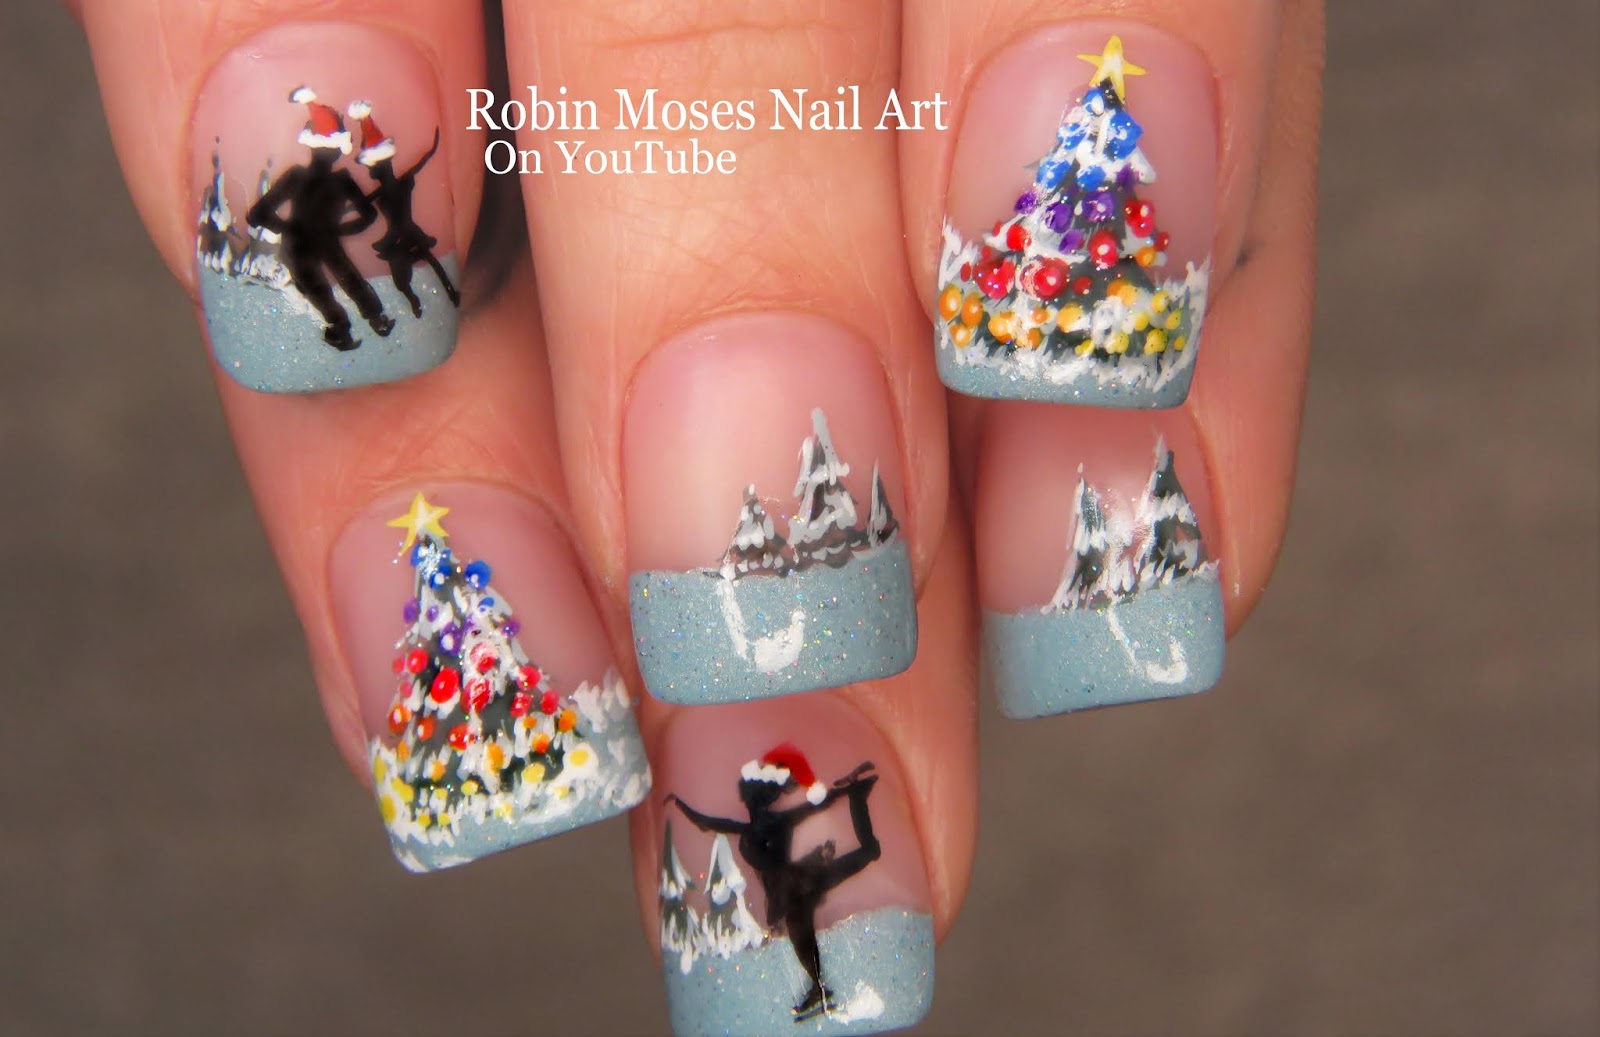 2. "Festive Father Christmas Nail Art Tutorial" - wide 5